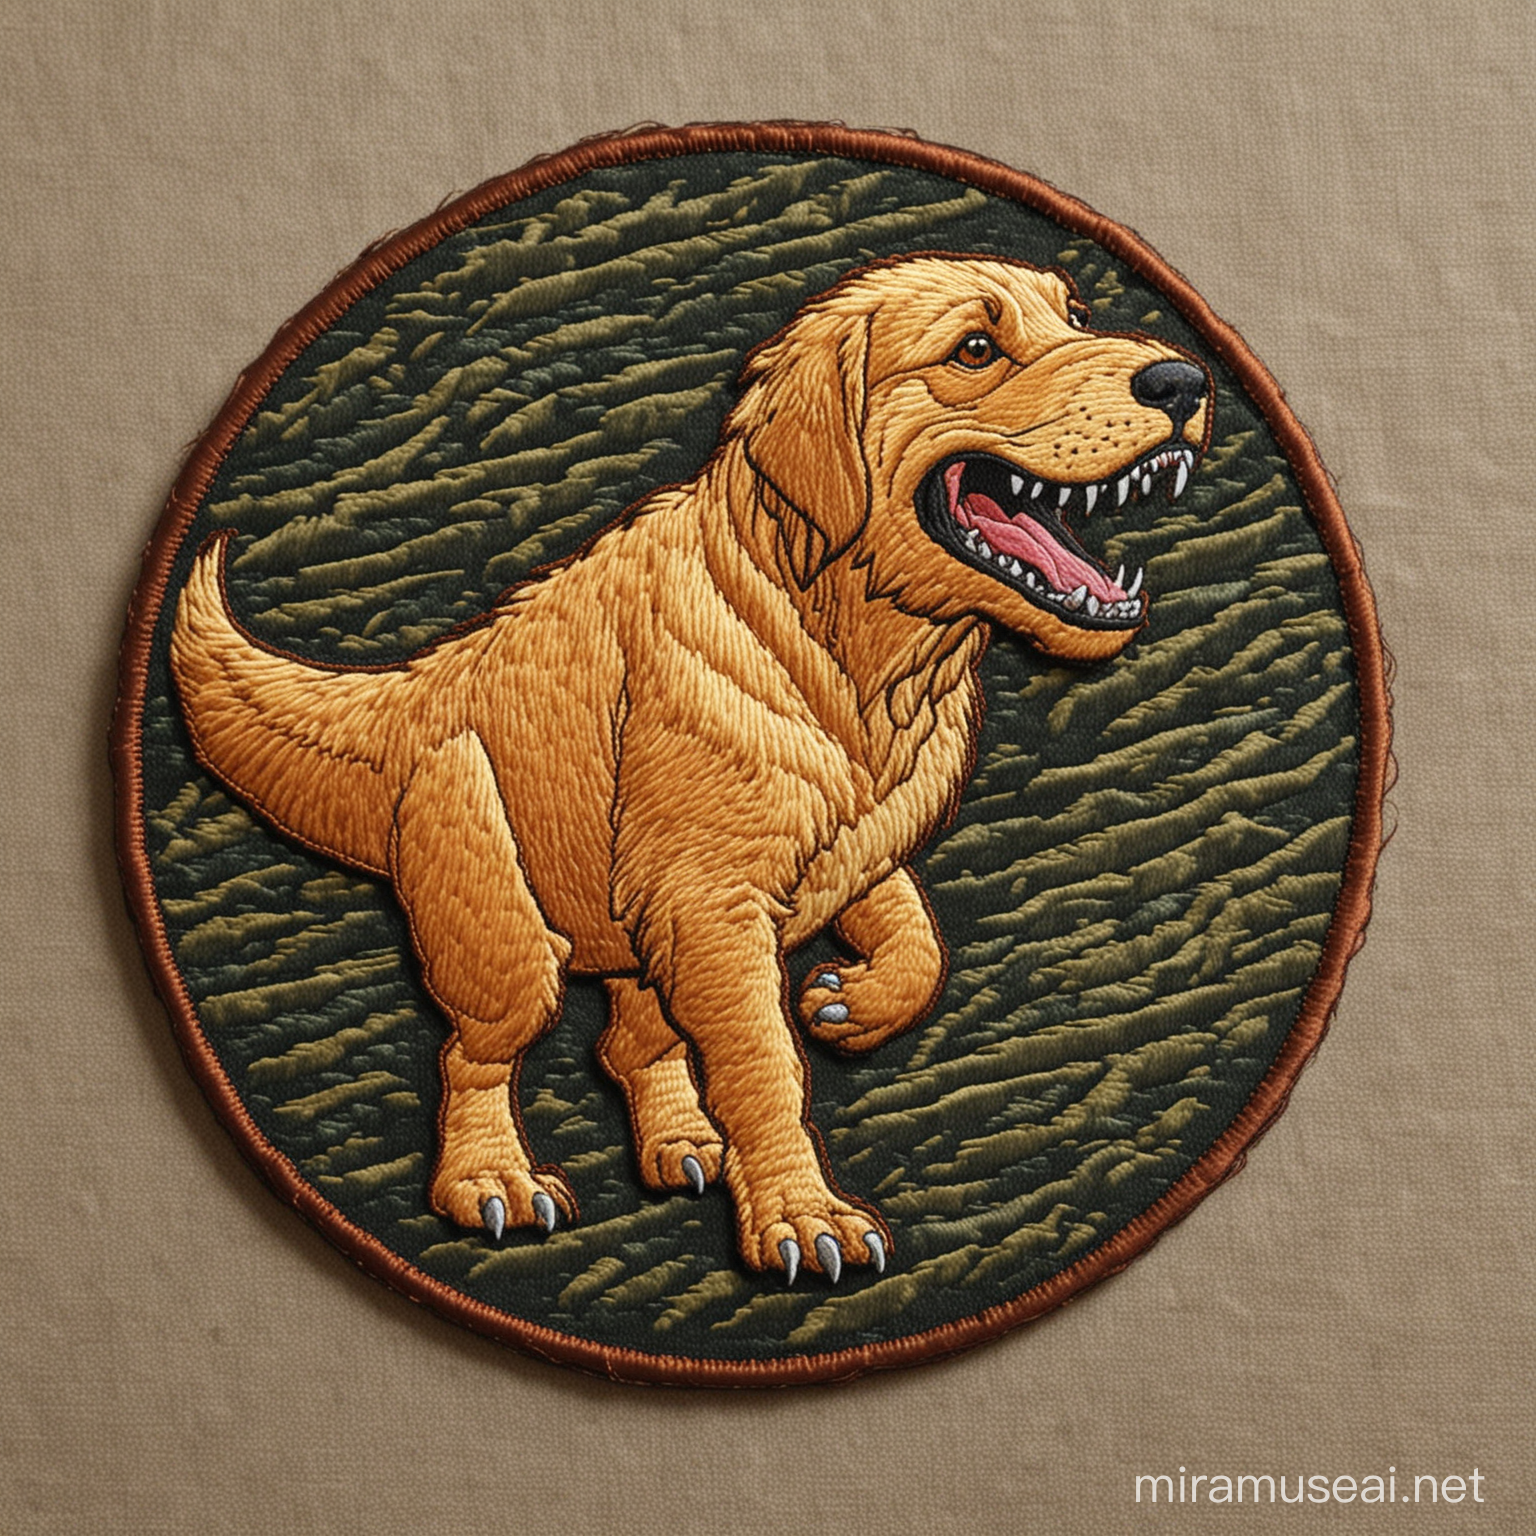 Embroidered Patch of TRex Golden Retriever Mix in ThickLined Style